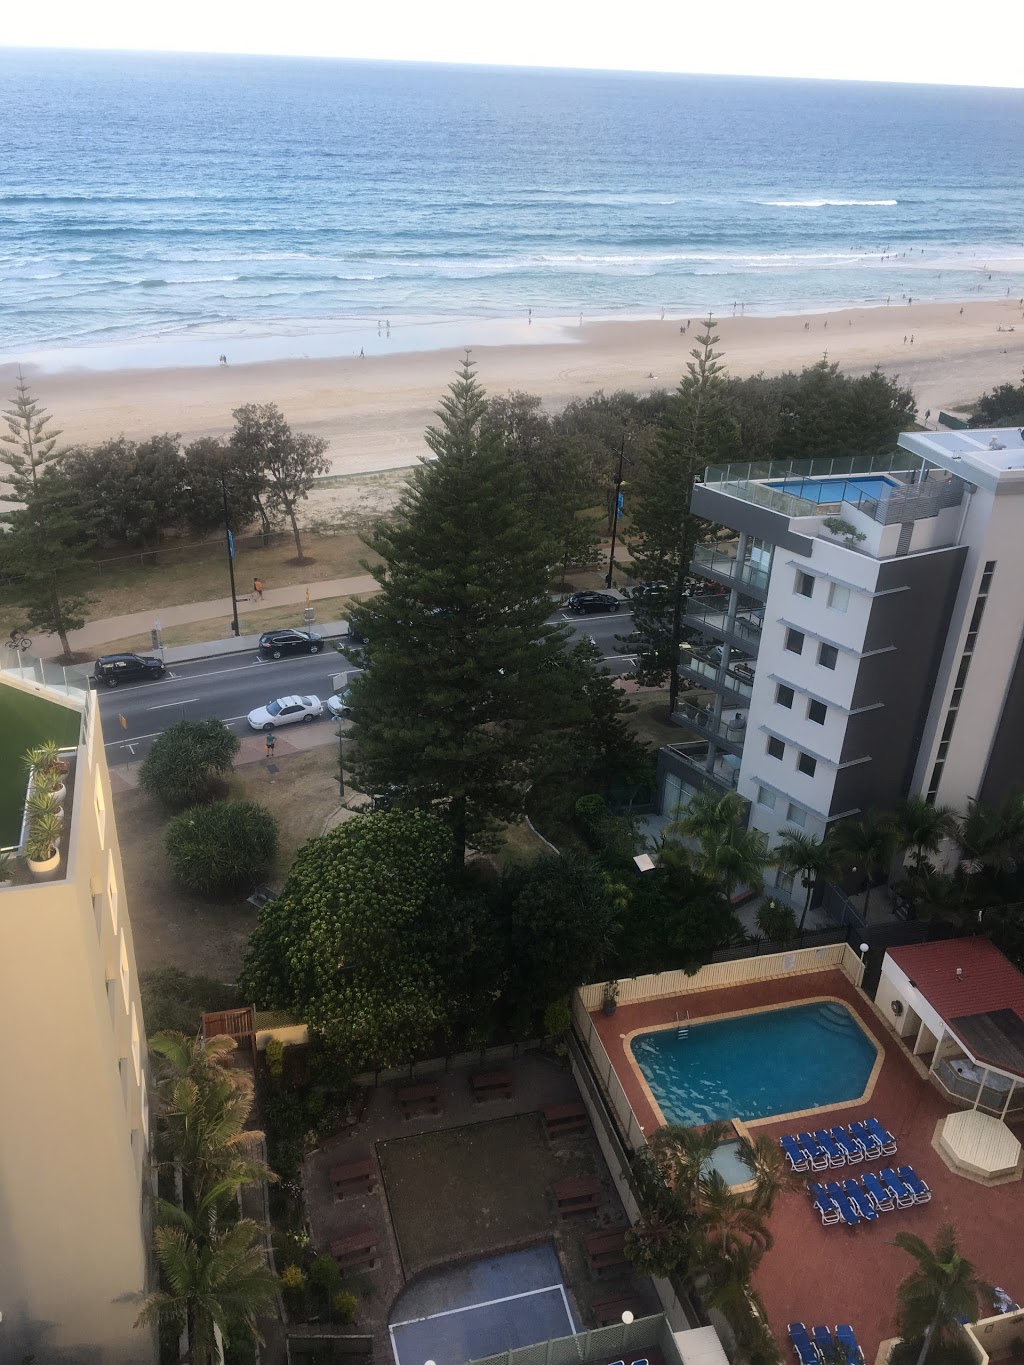 Erikas Holiday Apartments | lodging | 8 Trickett St, Surfers Paradise QLD 4217, Australia | 0432077721 OR +61 432 077 721